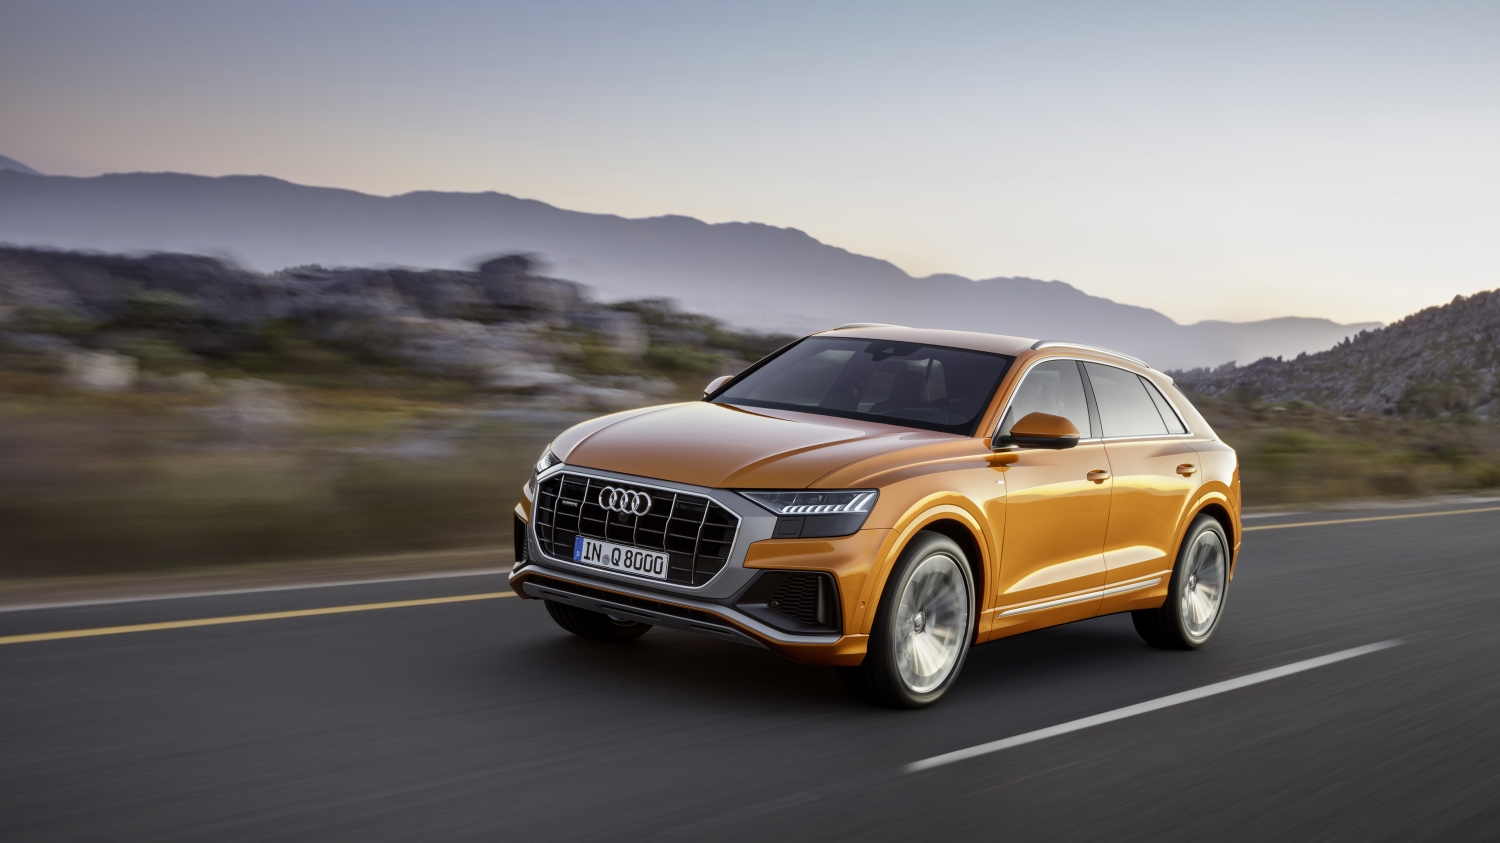 Audi Debuts Top-Of-The-Line Q8 SUV